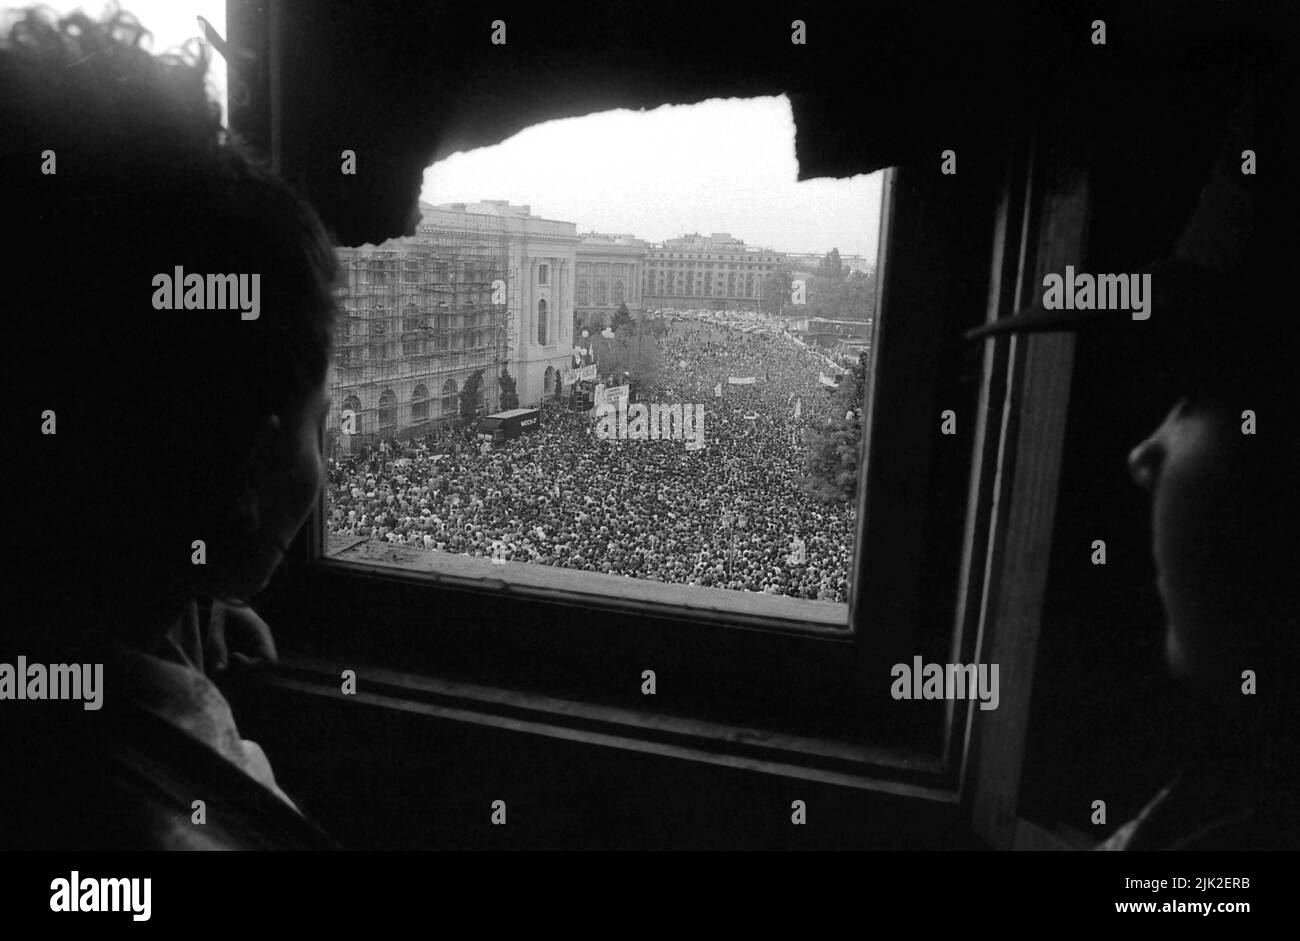 Bucharest, Romania, September 1992. Political rally organized by Romanian Democratic Convention (CDR) before the presidential elections of 1992. Huge crowd in the Revolution Square, with many people standing on the scaffolding used on the buildings damaged in the revolution of 1989. Others were watching from inside some of these buildings. Stock Photo